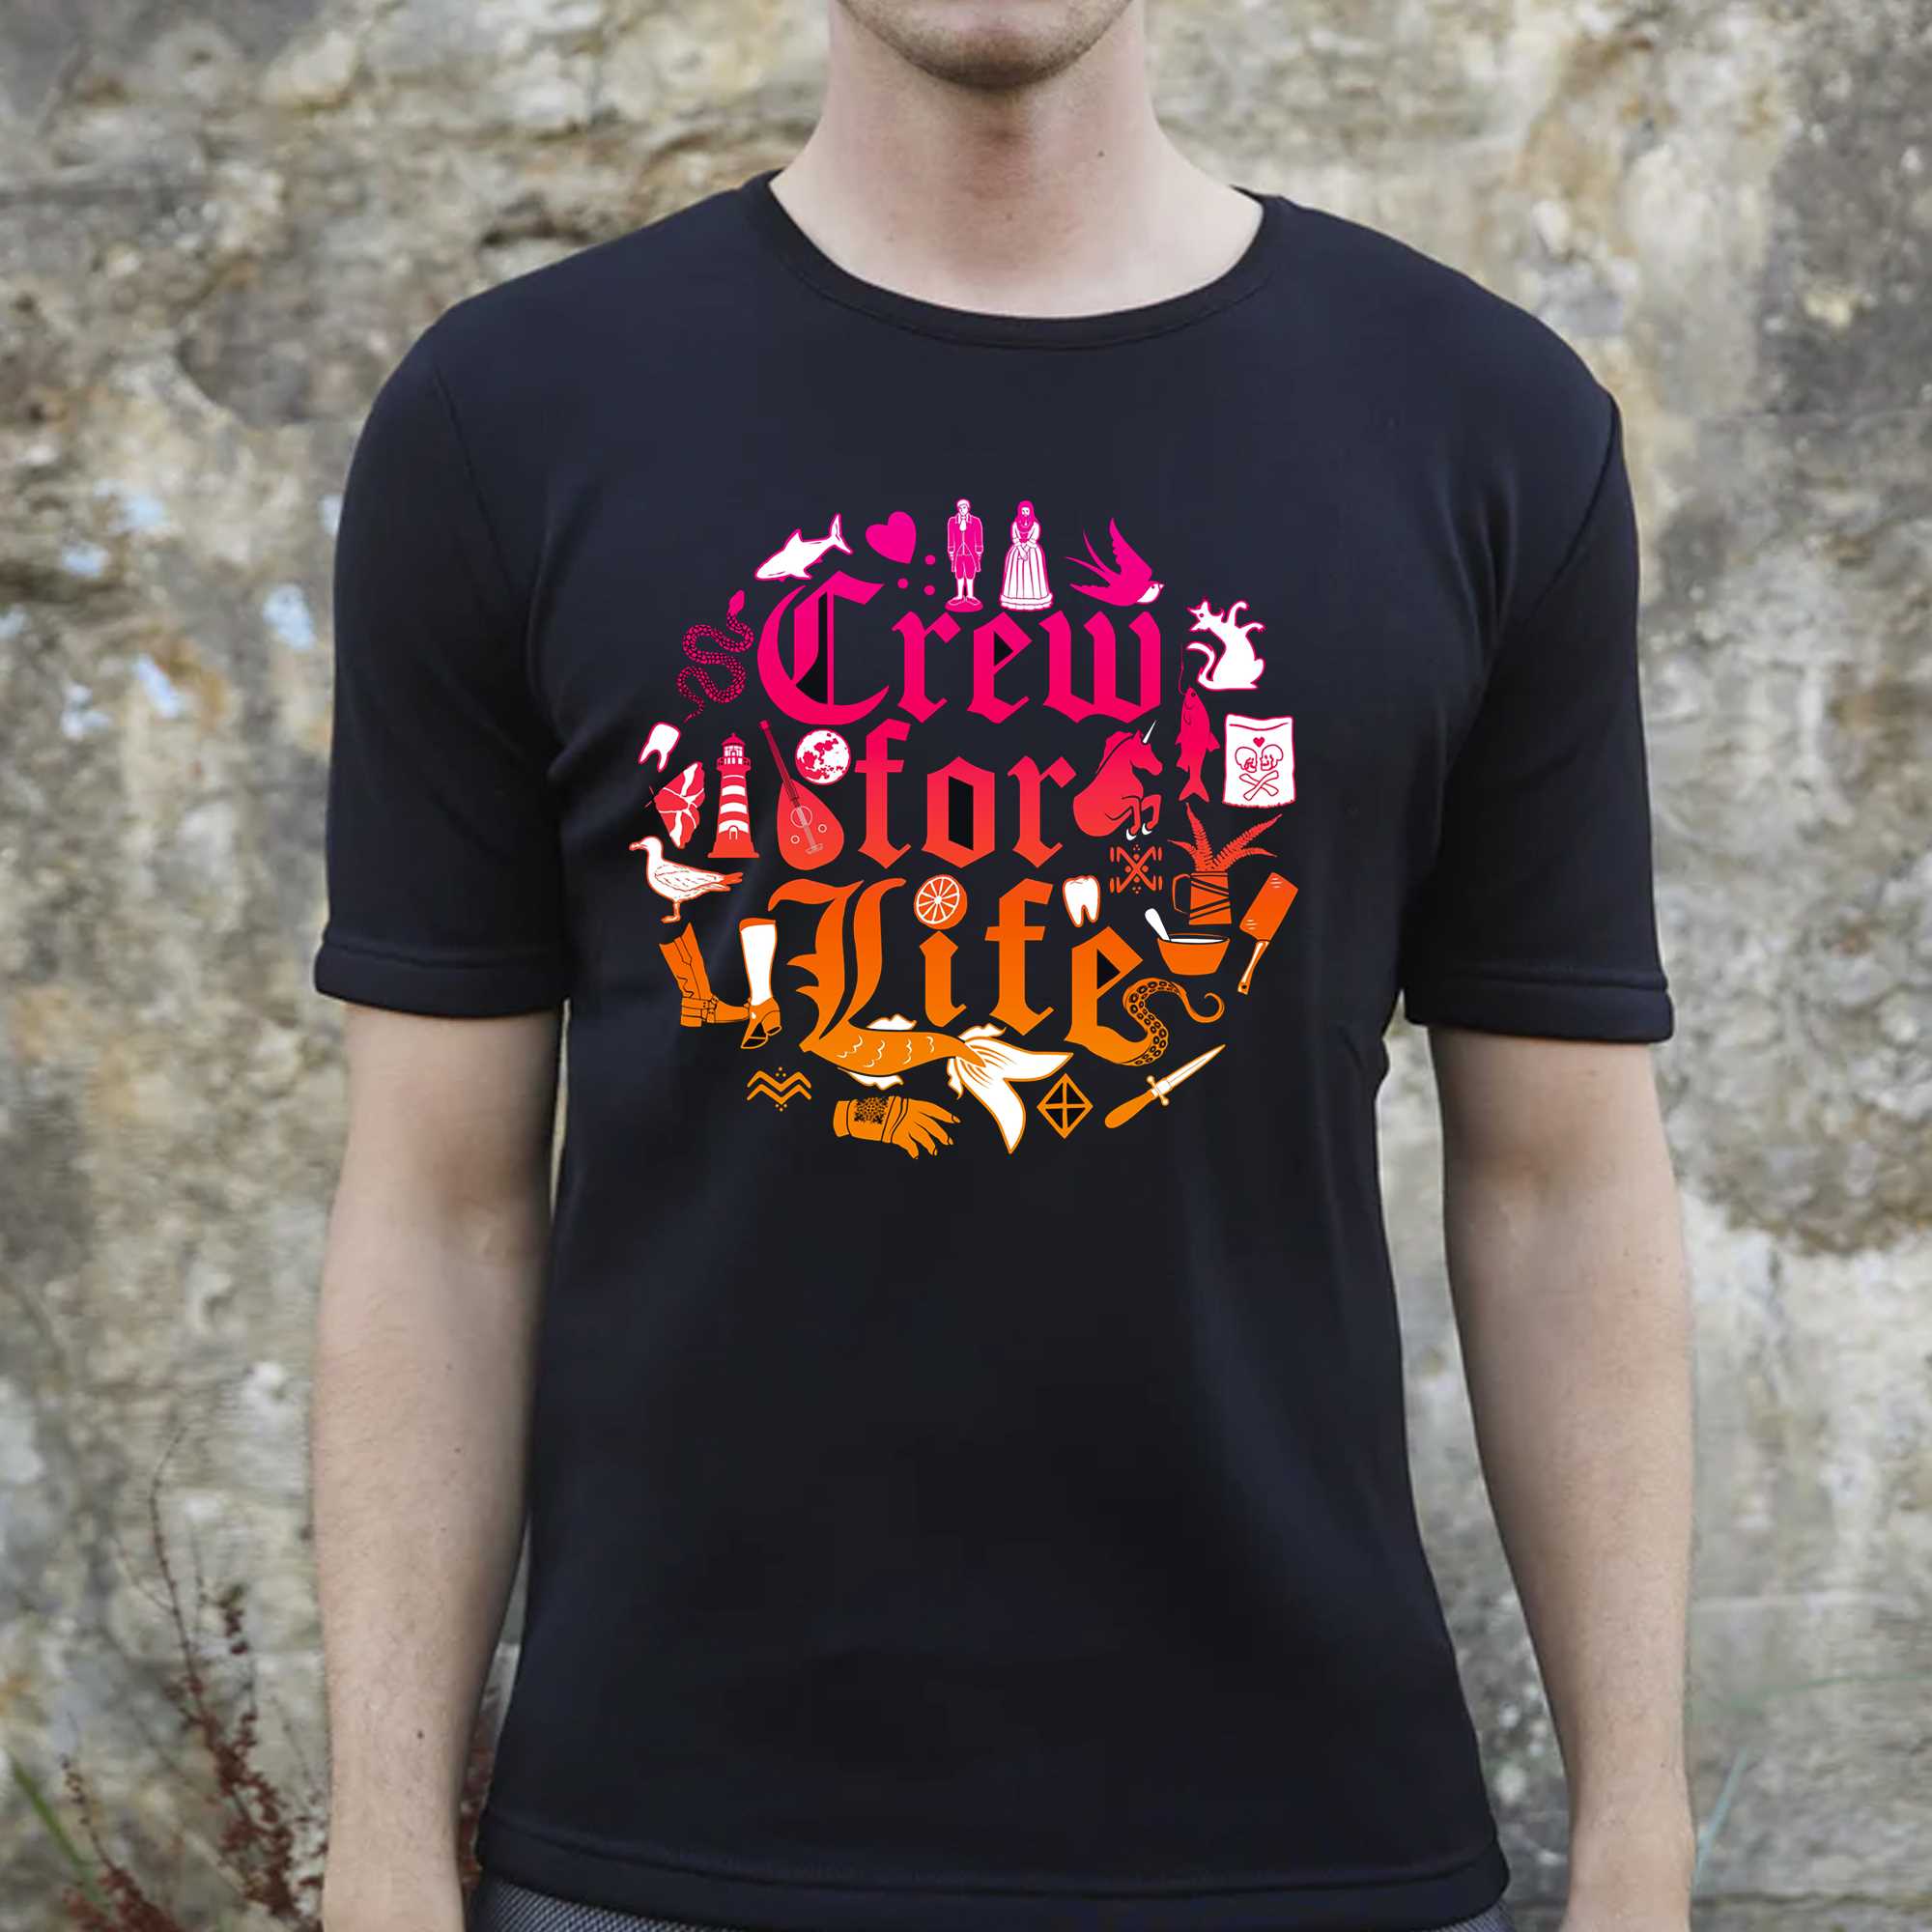 Join the Crew for Life with Samba Schutte's Exclusive Shirt! - Shibtee ...